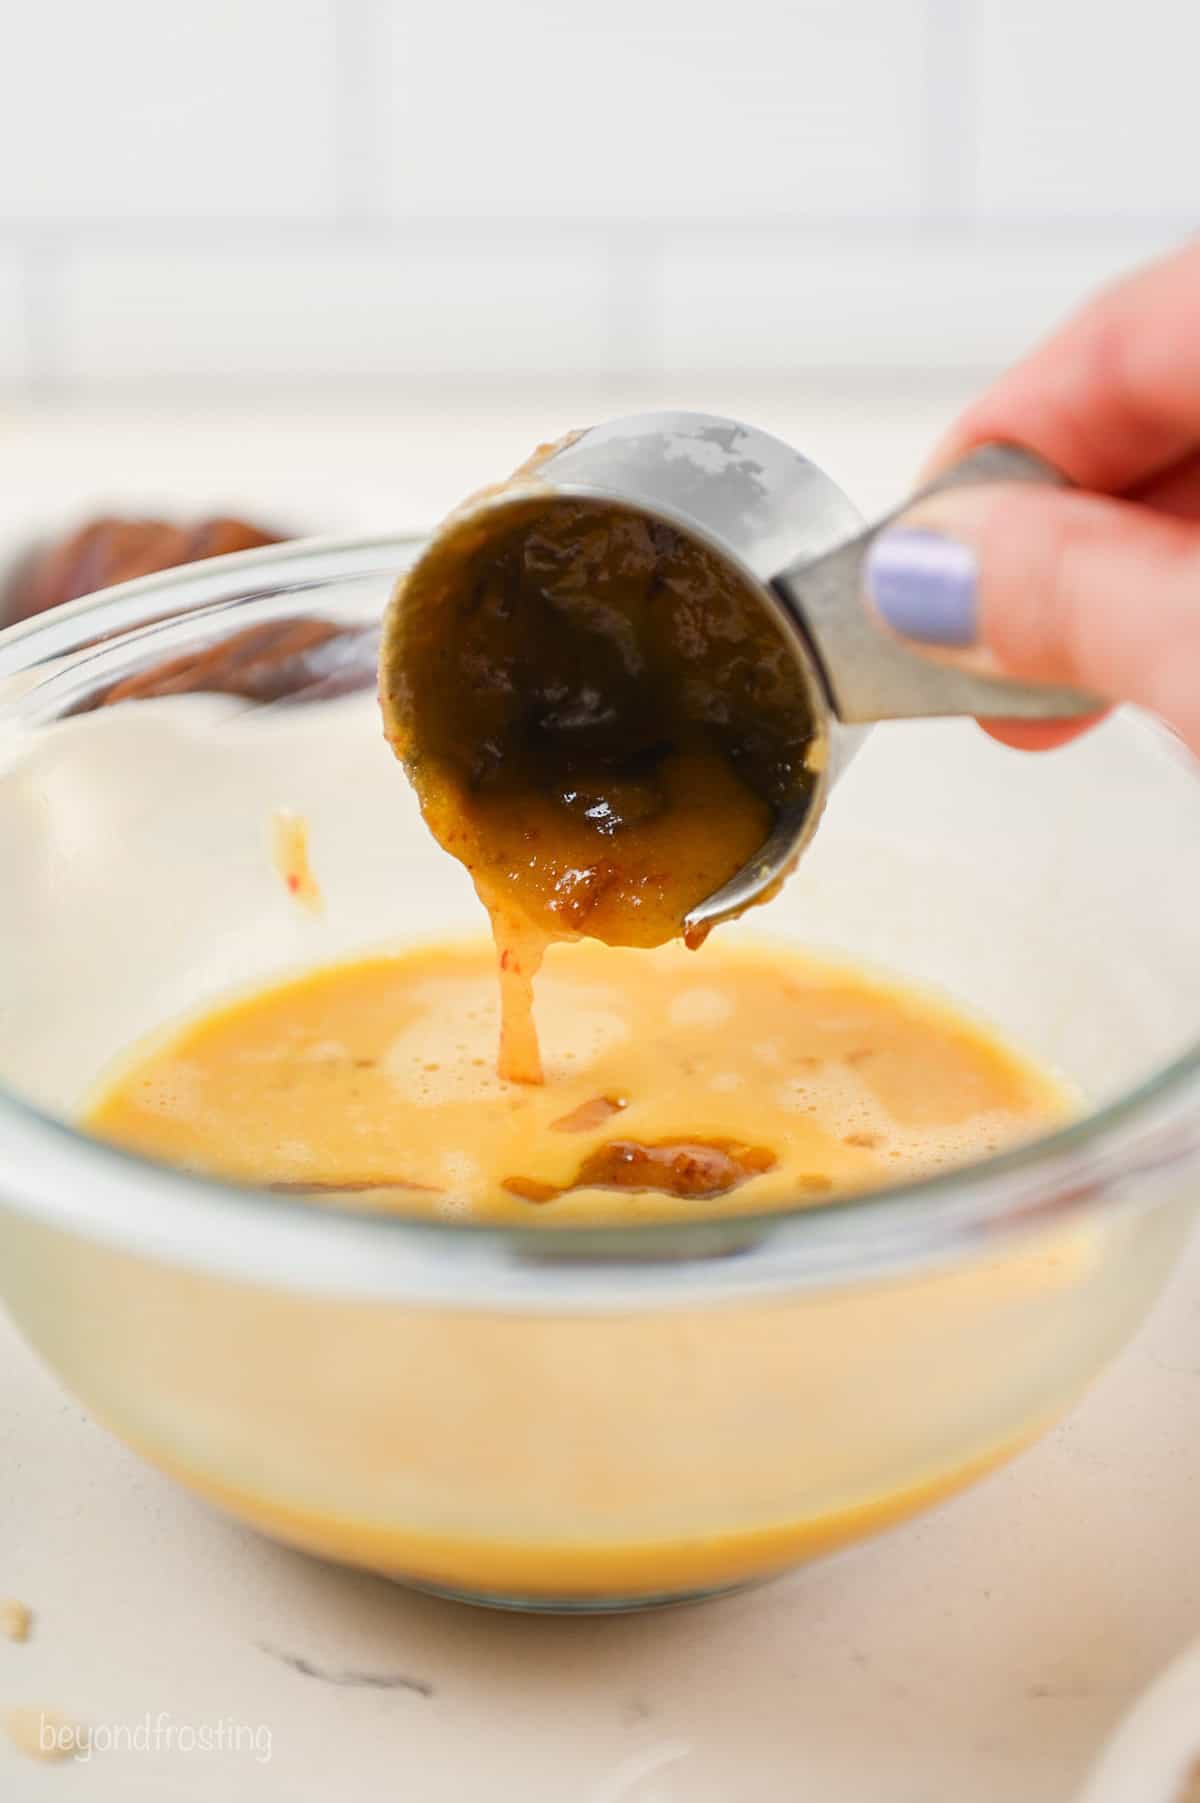 A hand tipping a small scoop of hot date mixture into a bowl of beaten egg mixture.